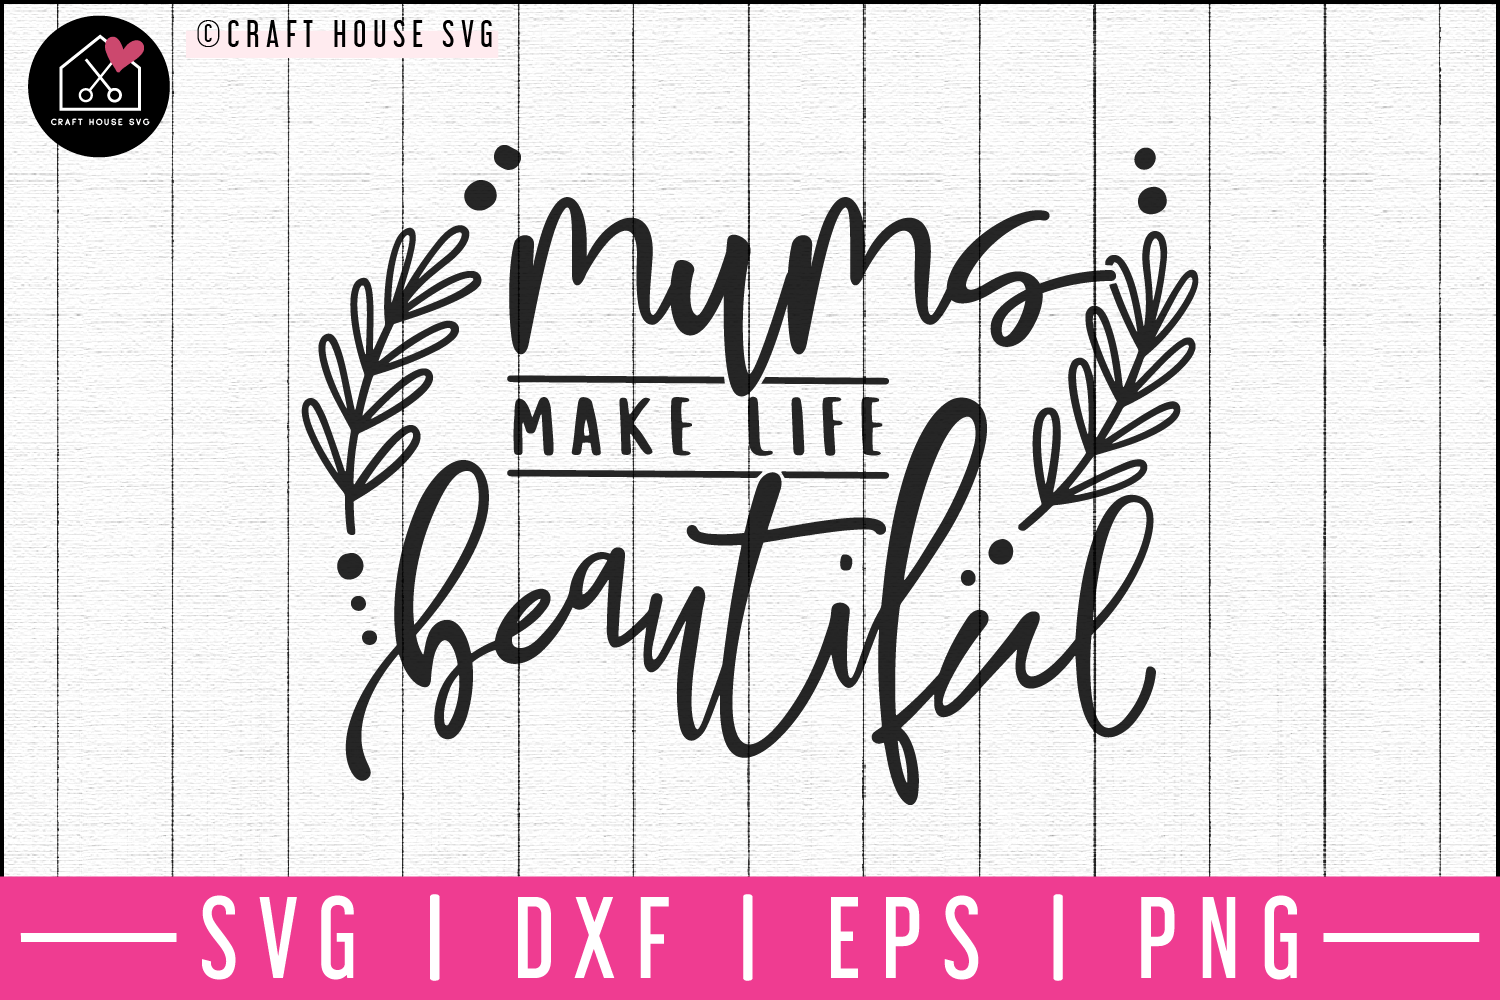 Moms make life beautiful SVG | M52F Craft House SVG - SVG files for Cricut and Silhouette